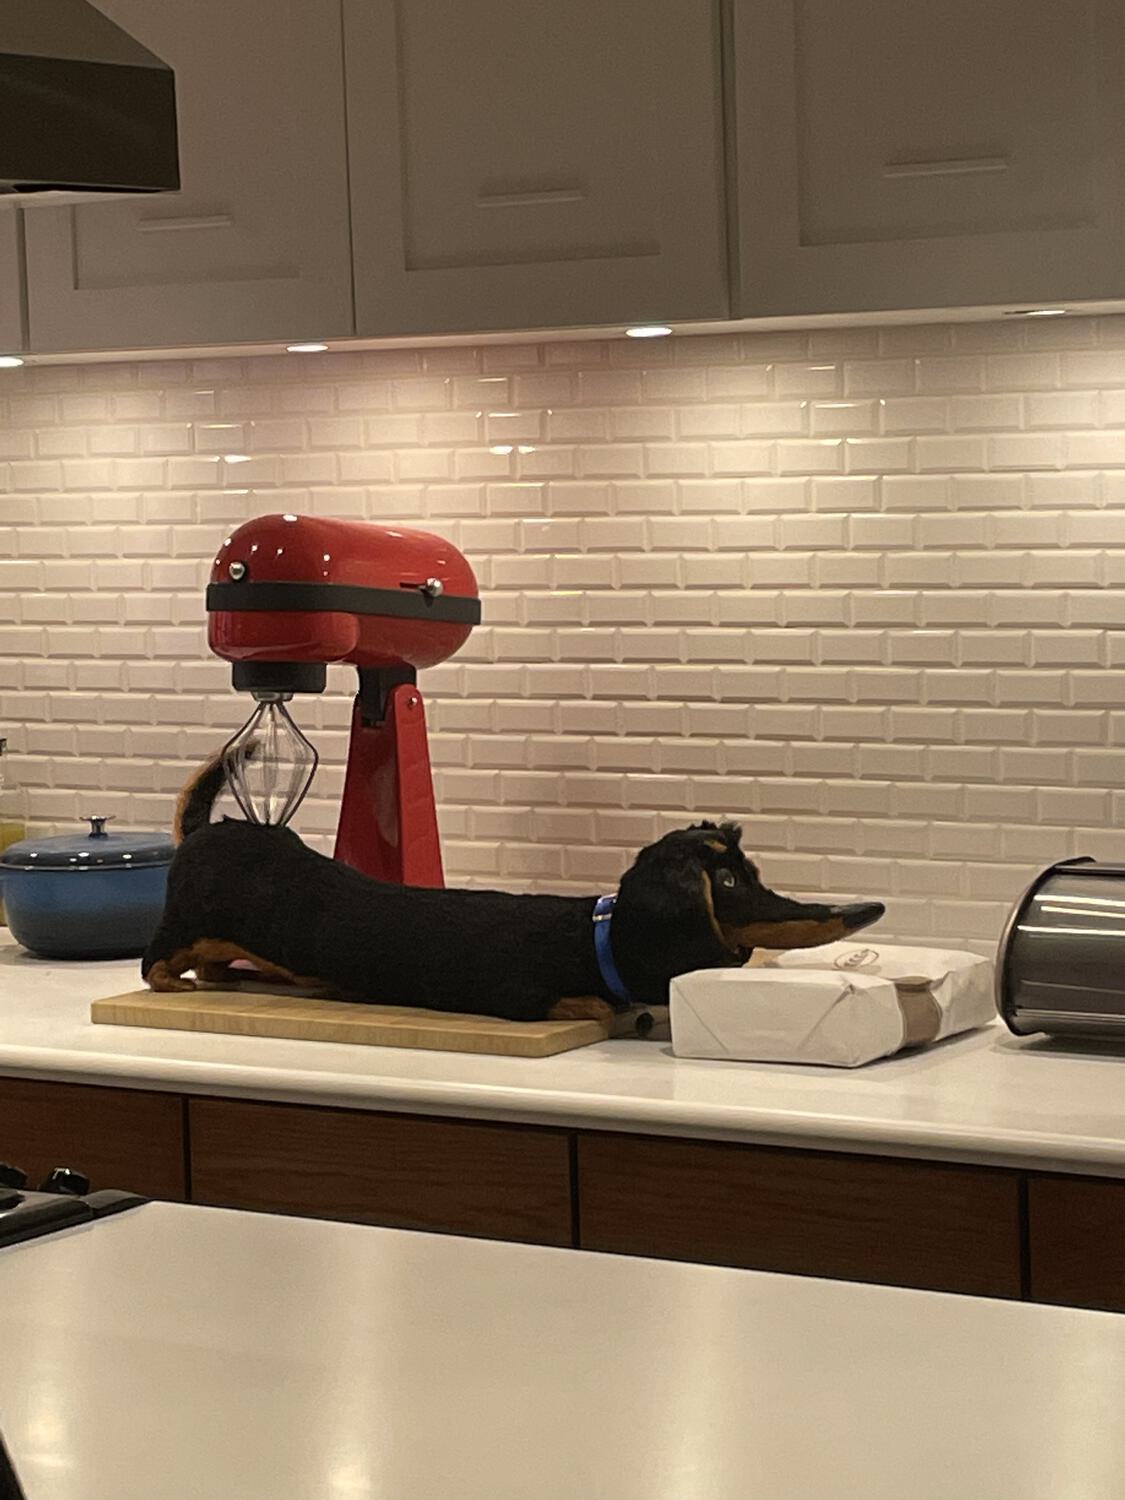 An animatronic dachsund on a kitchen counter, positioned so its butt is getting scratched by a stand mixer